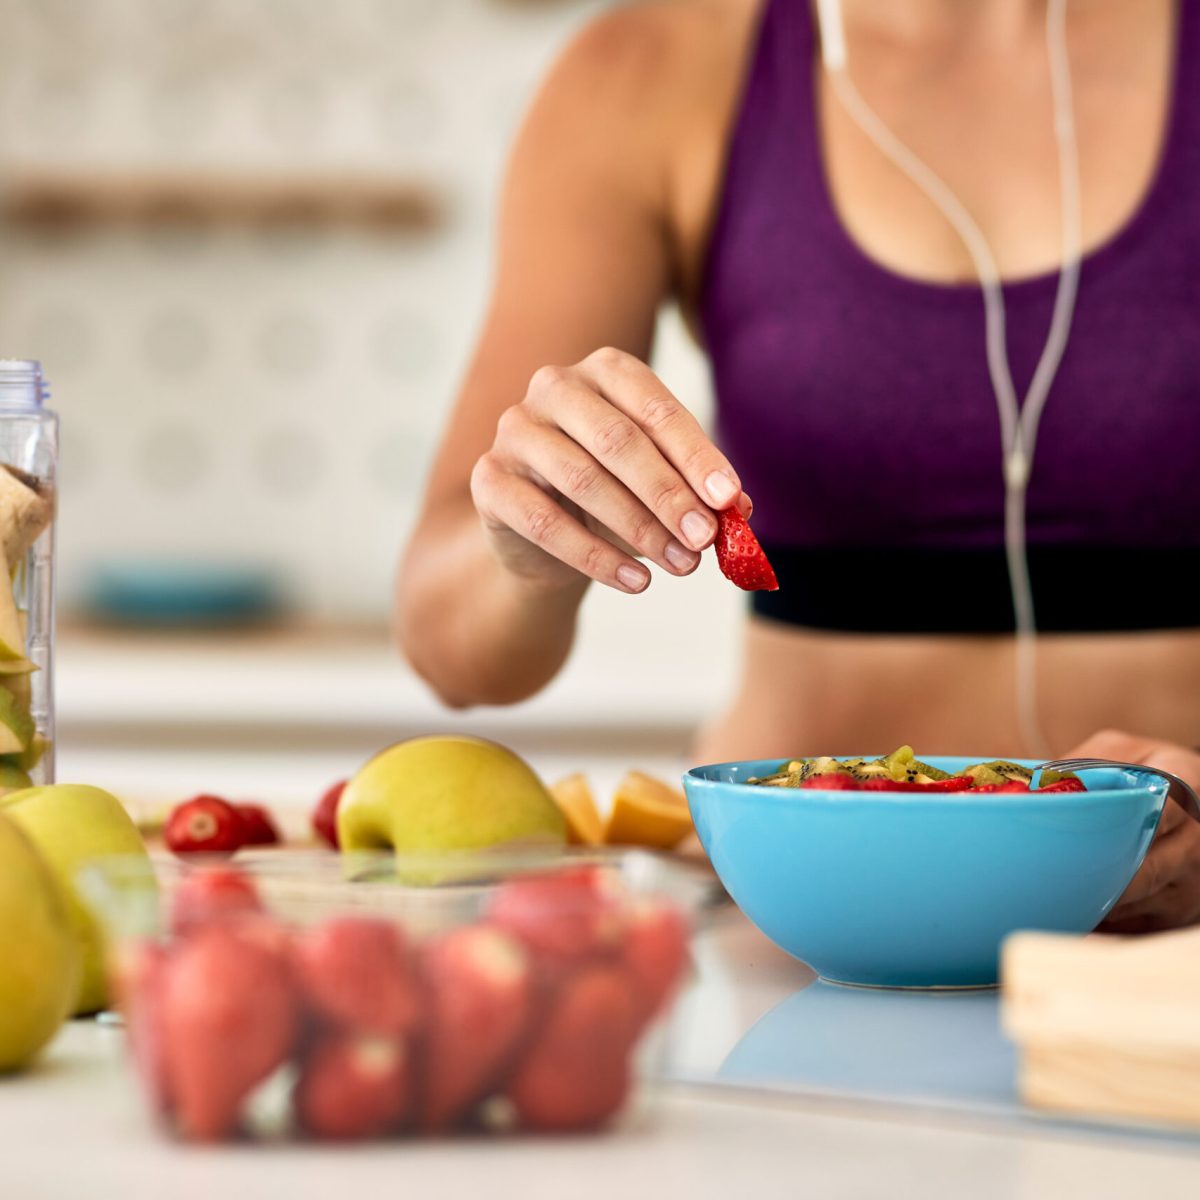 Close-up of athletic woman adding strawberries while making fruit salad in the kitchen.